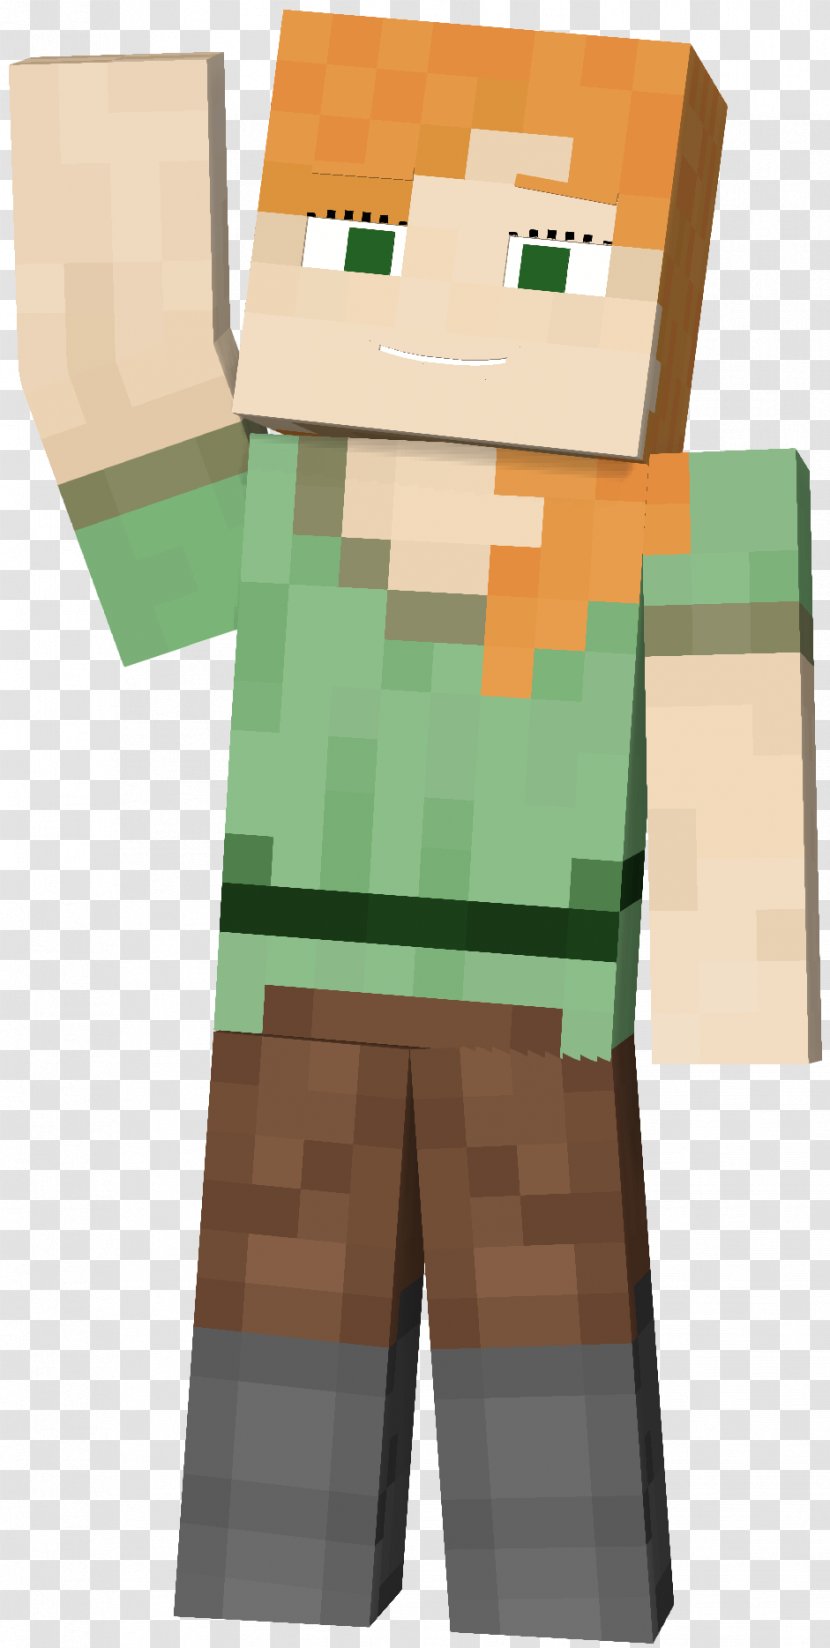 Minecraft Video Game Player Character Gamer - Outerwear Transparent PNG